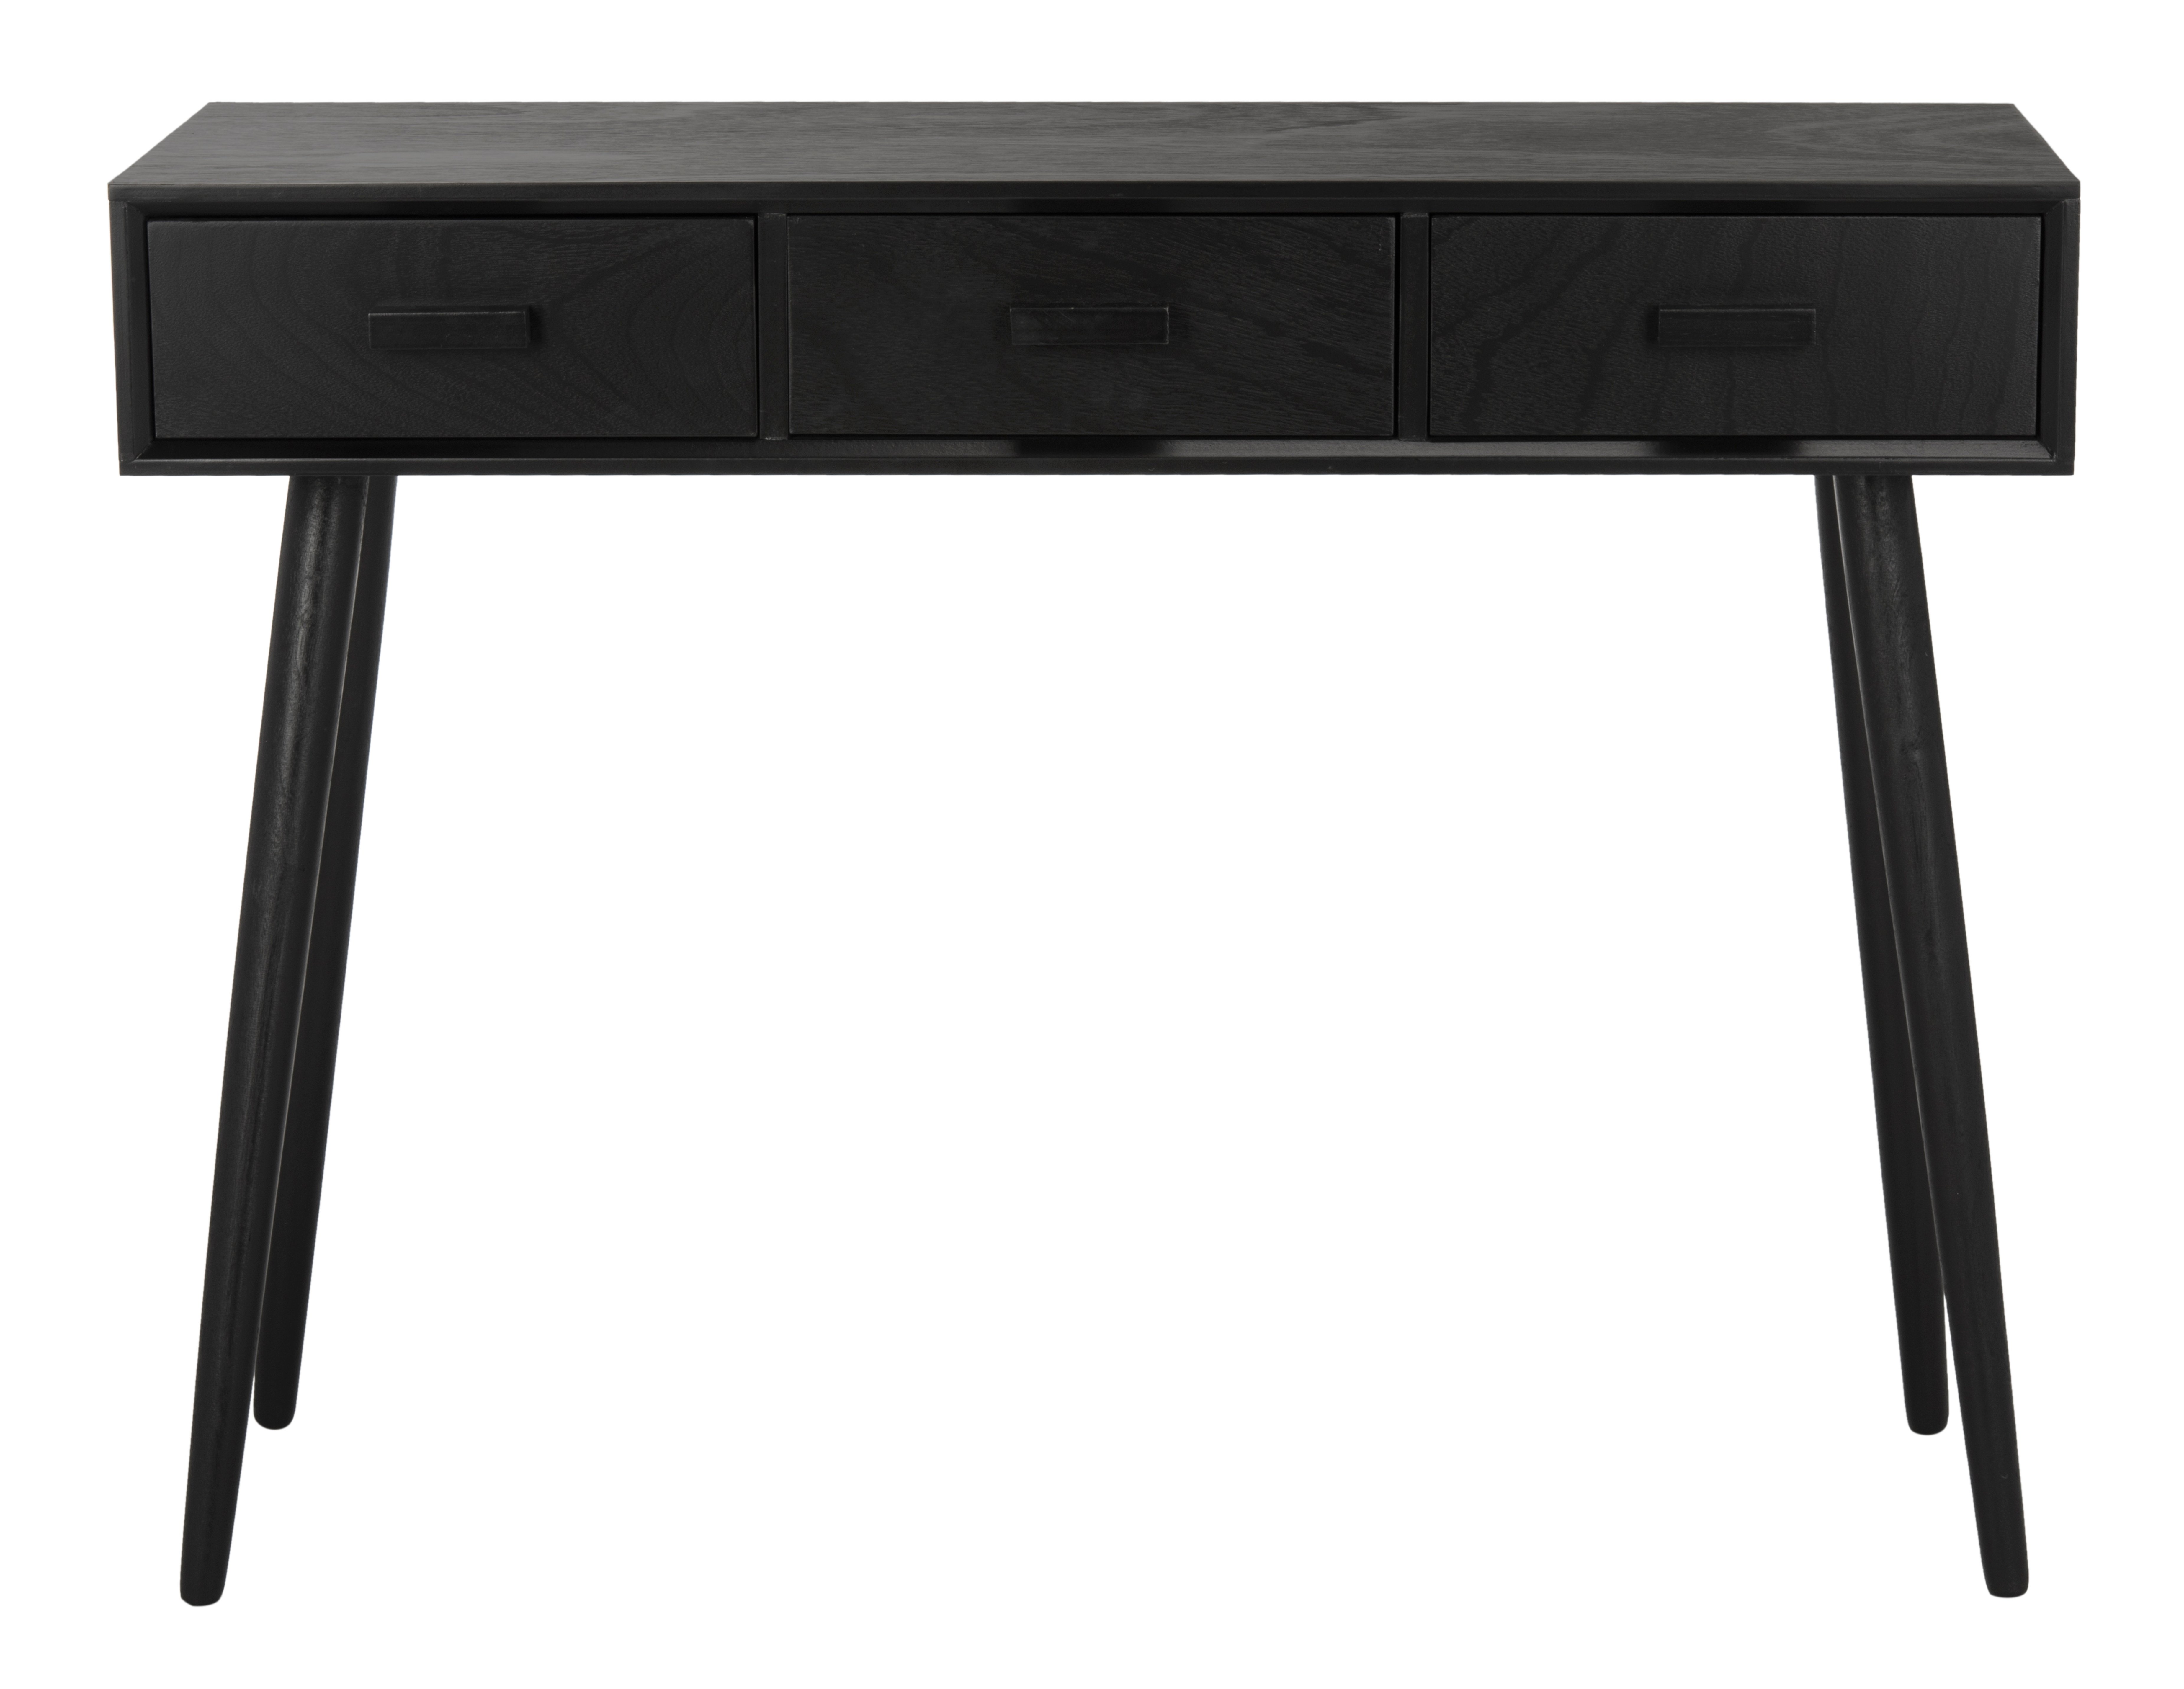 Albus 3-Drawer Console Table, Black - Arlo Home